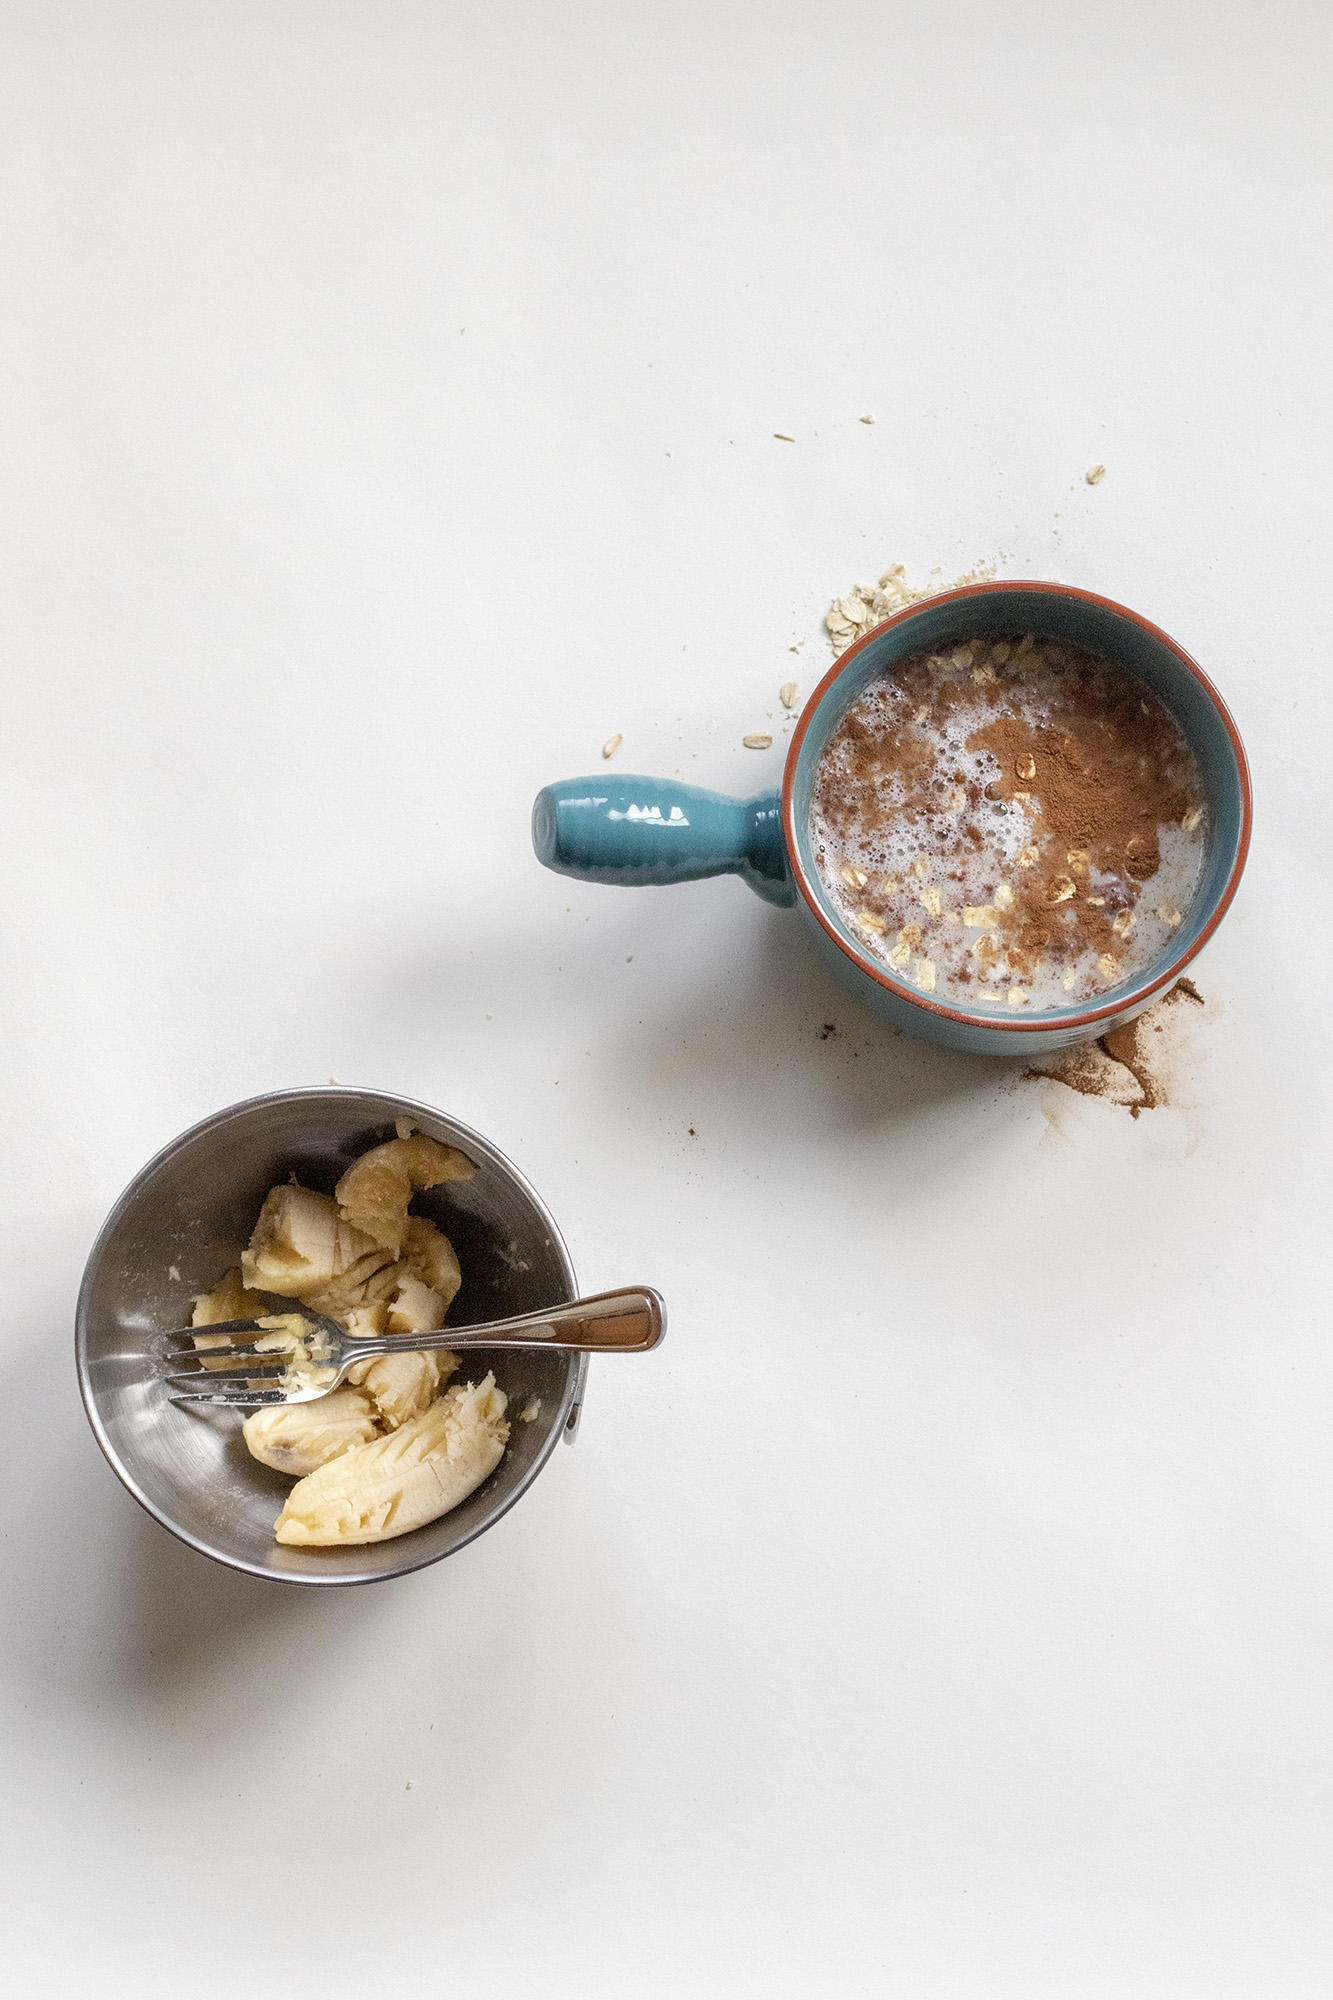 Mashed band with a fork in a metal bowl and egg whites with cinnamon and milk in another blue bowl. Both on a white background.